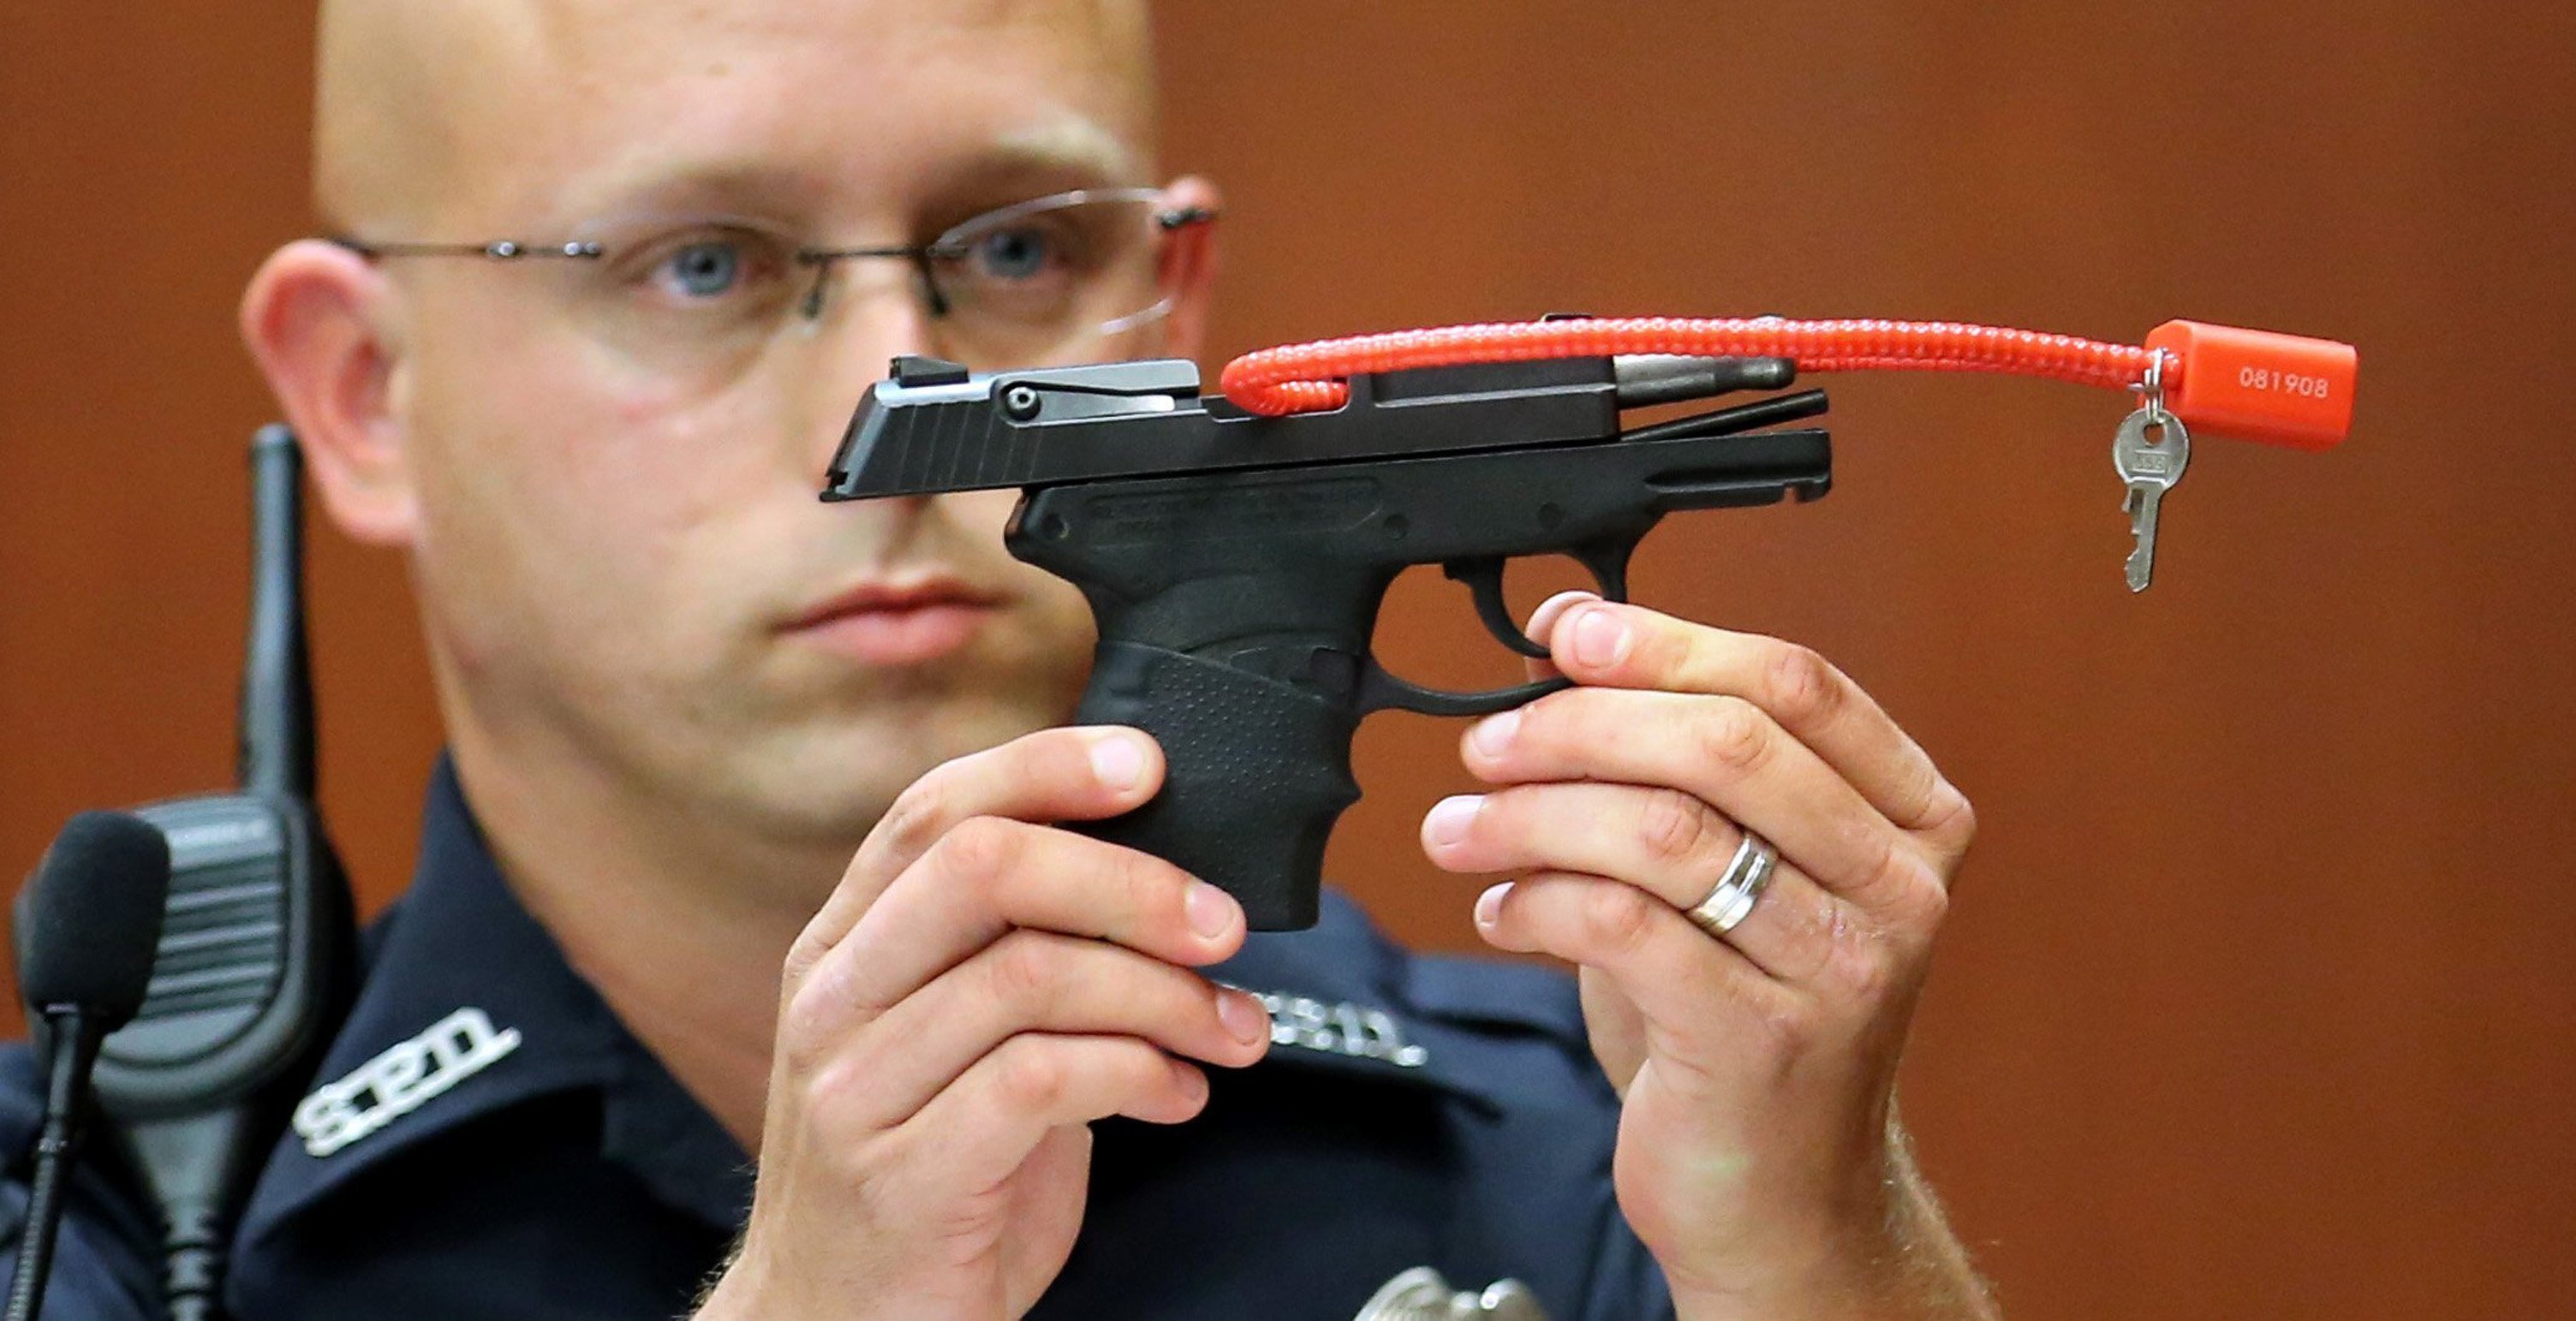 Sanford police officer Timothy Smith holds up the gun that was used to kill Trayvon Martin, while testifying in the 15th day of the George Zimmerman trial, in Seminole circuit court in Sanford, Florida, Friday, June 28, 2013. (Joe Burbank—Orlando Sentinel/MCT/Getty Images)